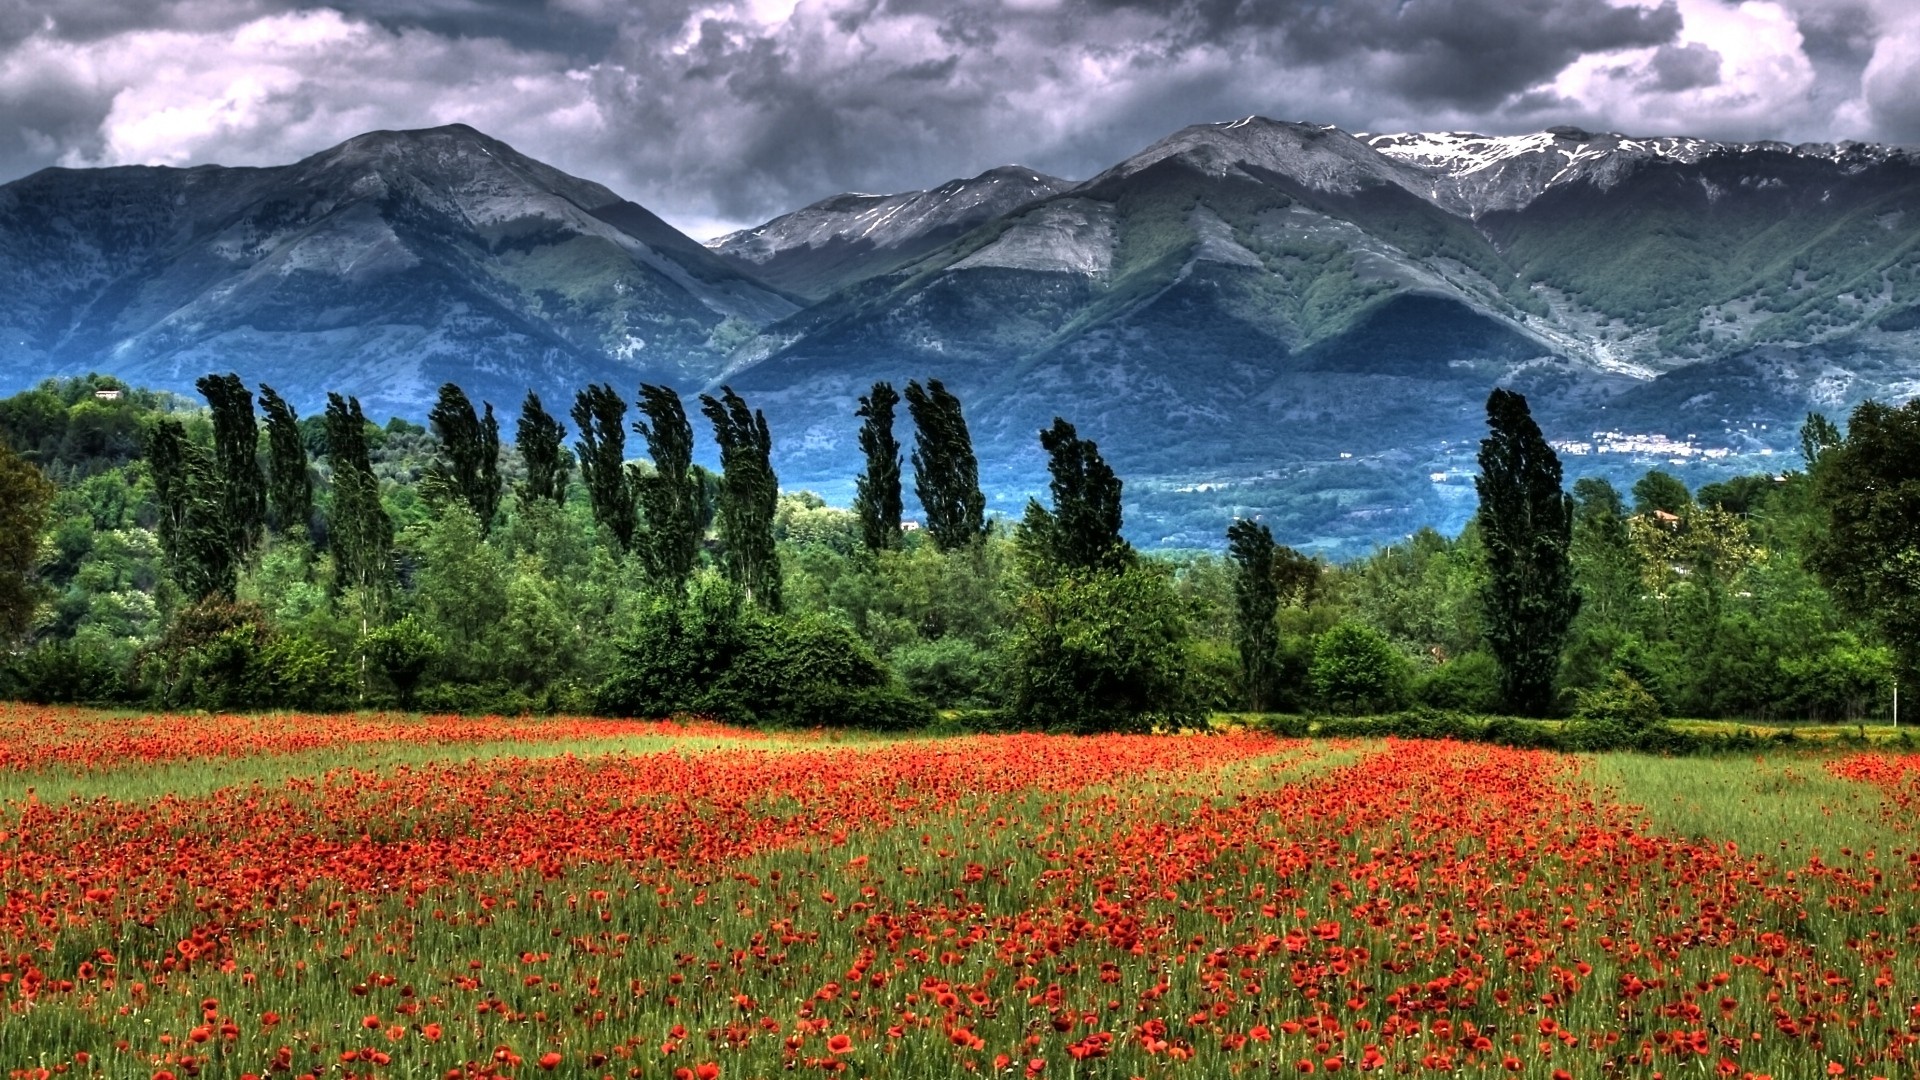 General 1920x1080 trees clouds landscape flowers grass HDR plants mountains Agro (Plants)